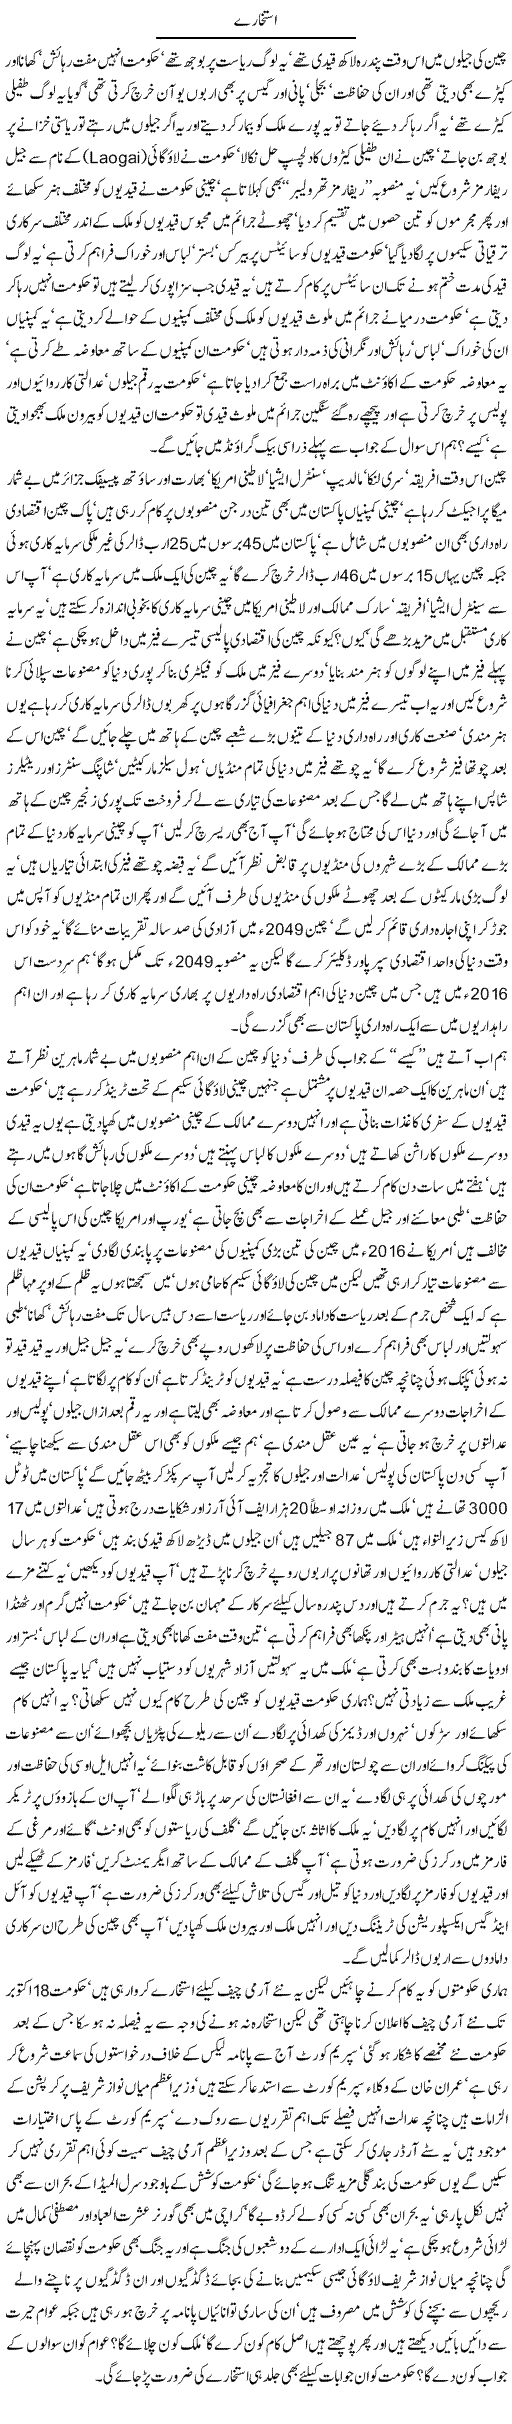 istekhawray-by-javed-chaudhry